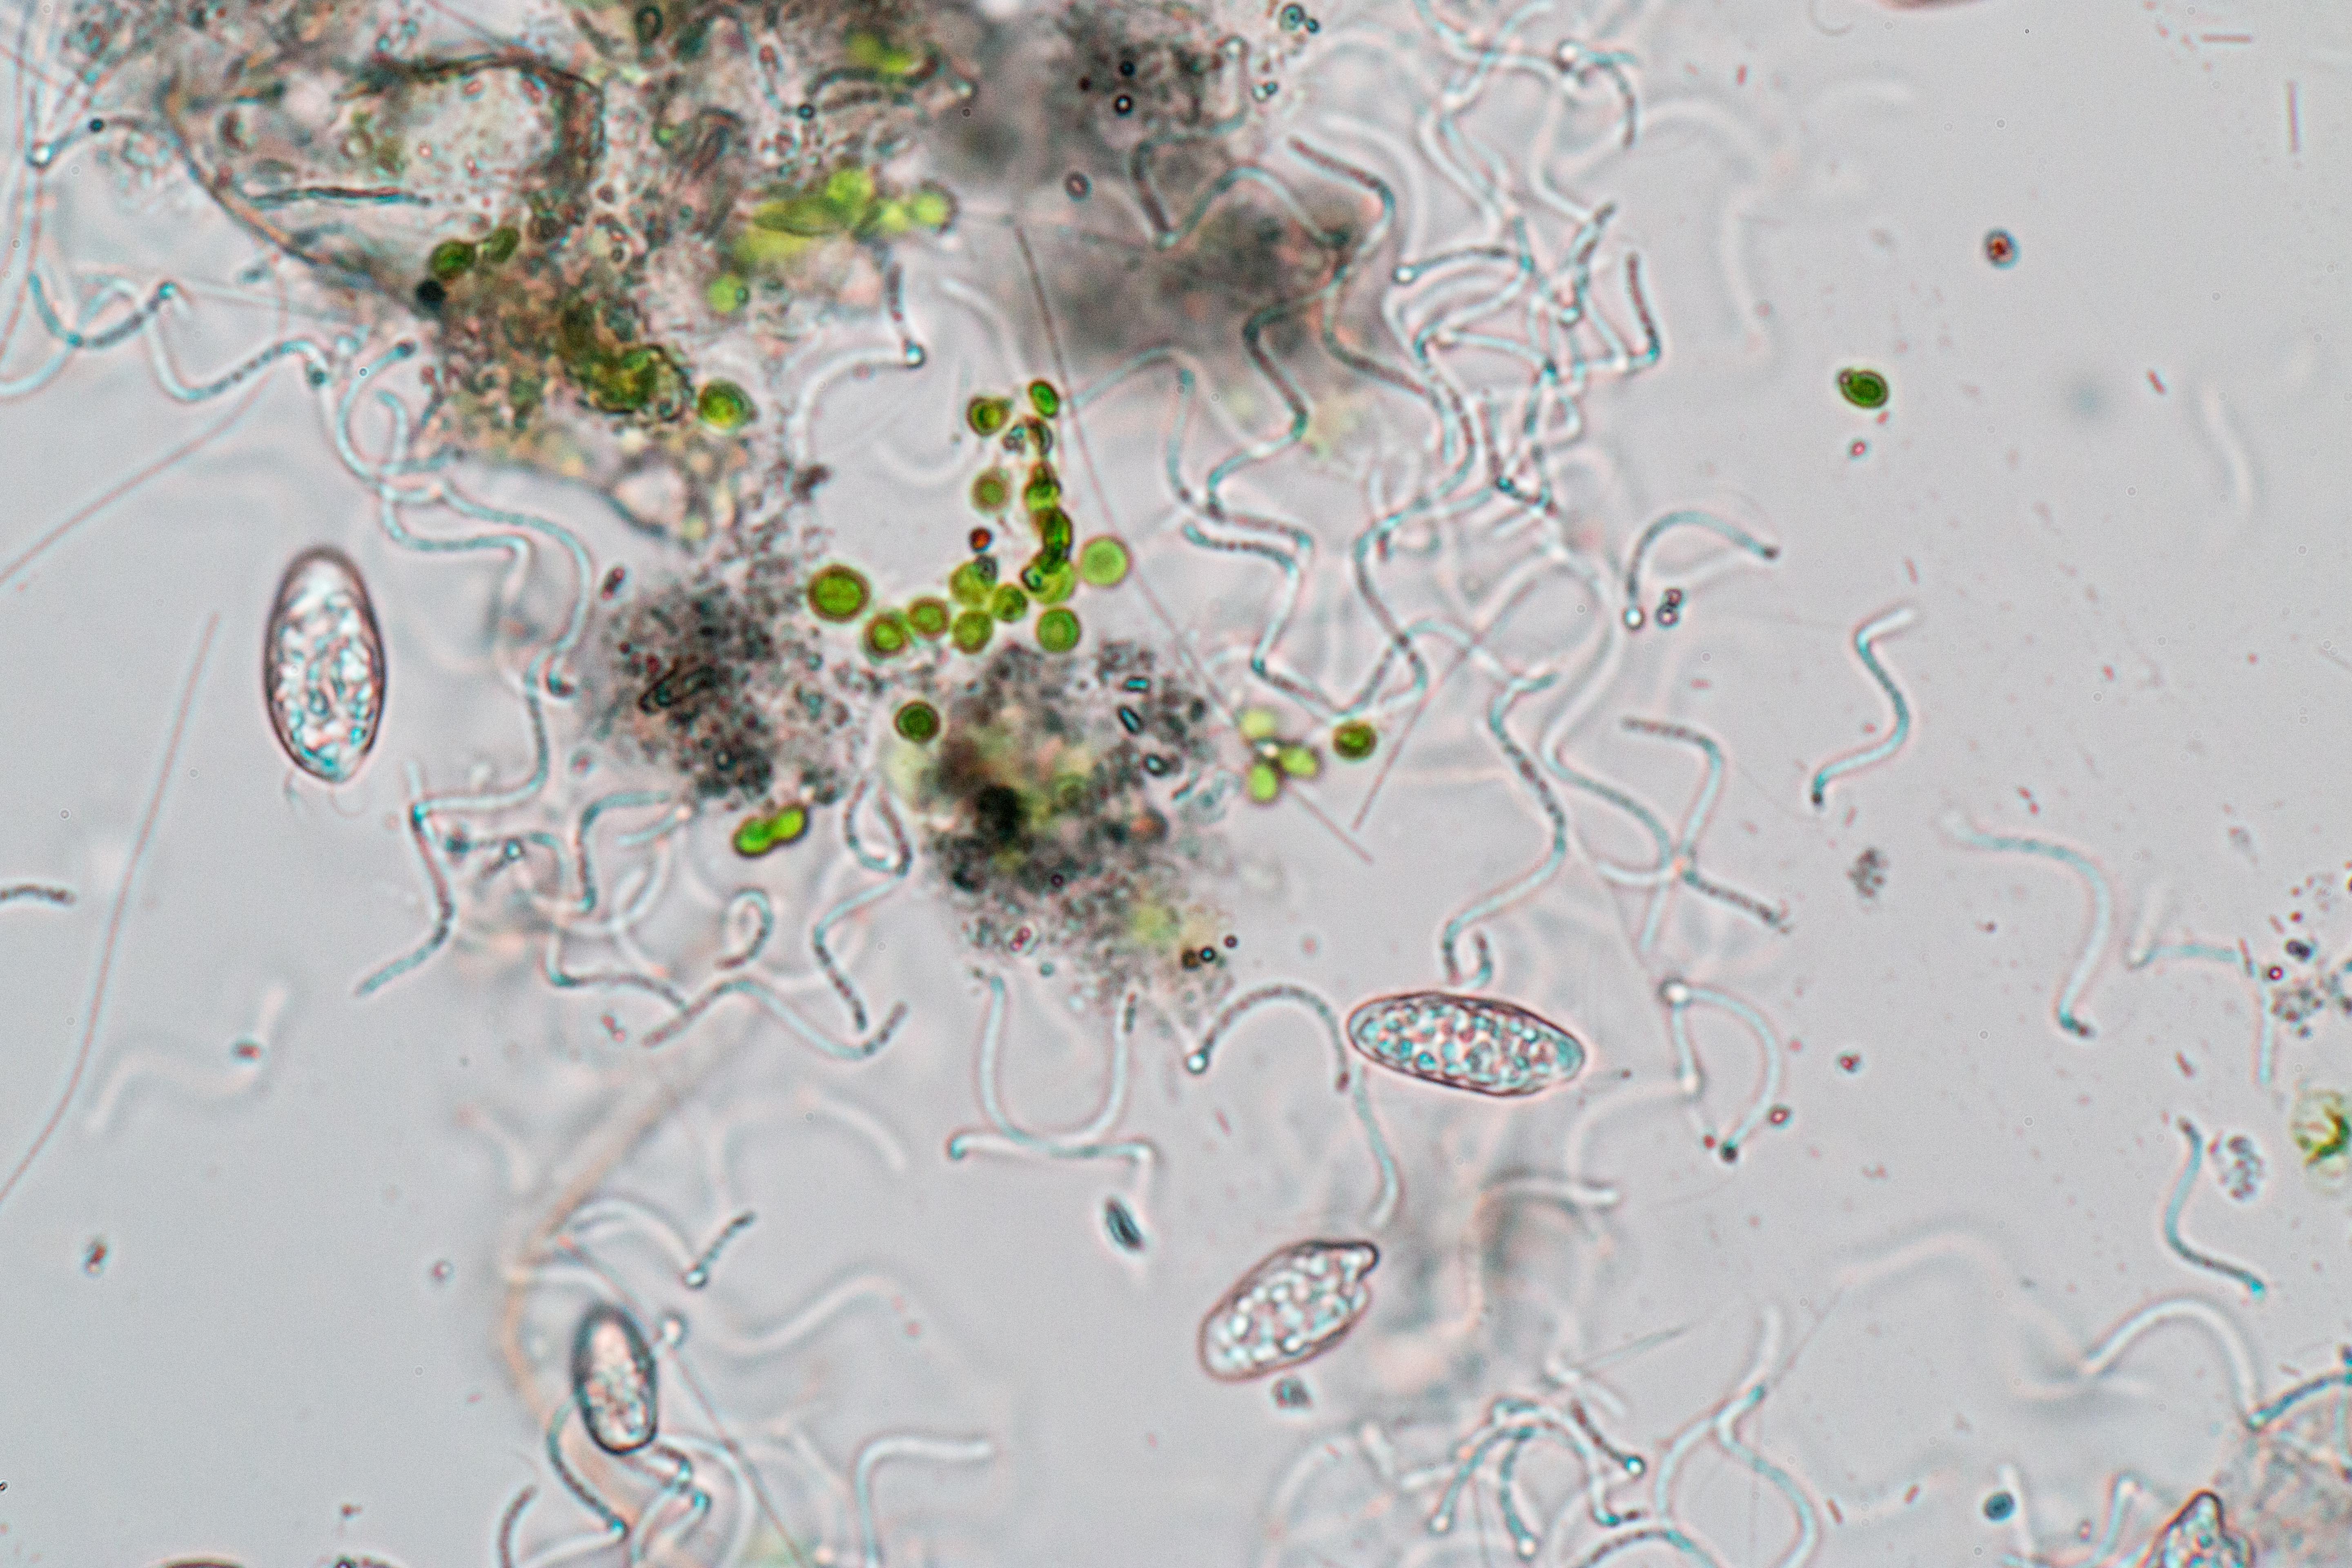 Bacteria in a drop of water